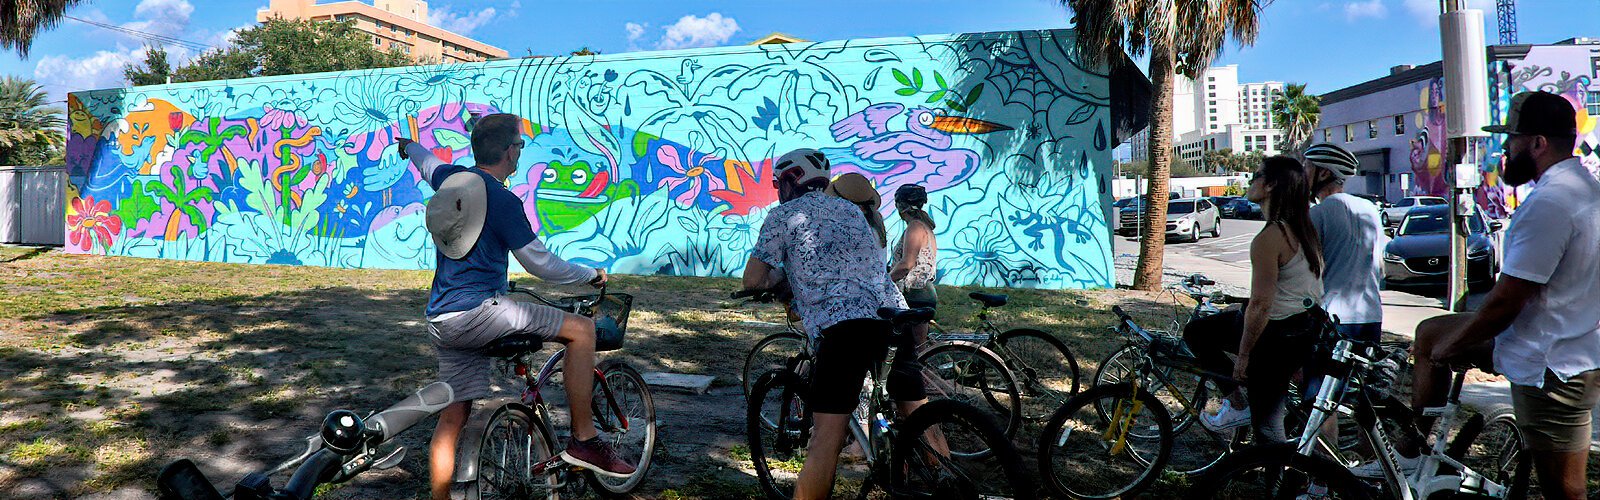 A guide conducting a mural biking tour gives information on the 2023 mural by Nevada artist Hannah Eddy, who wishes to inspire people to appreciate the funkiness in nature.